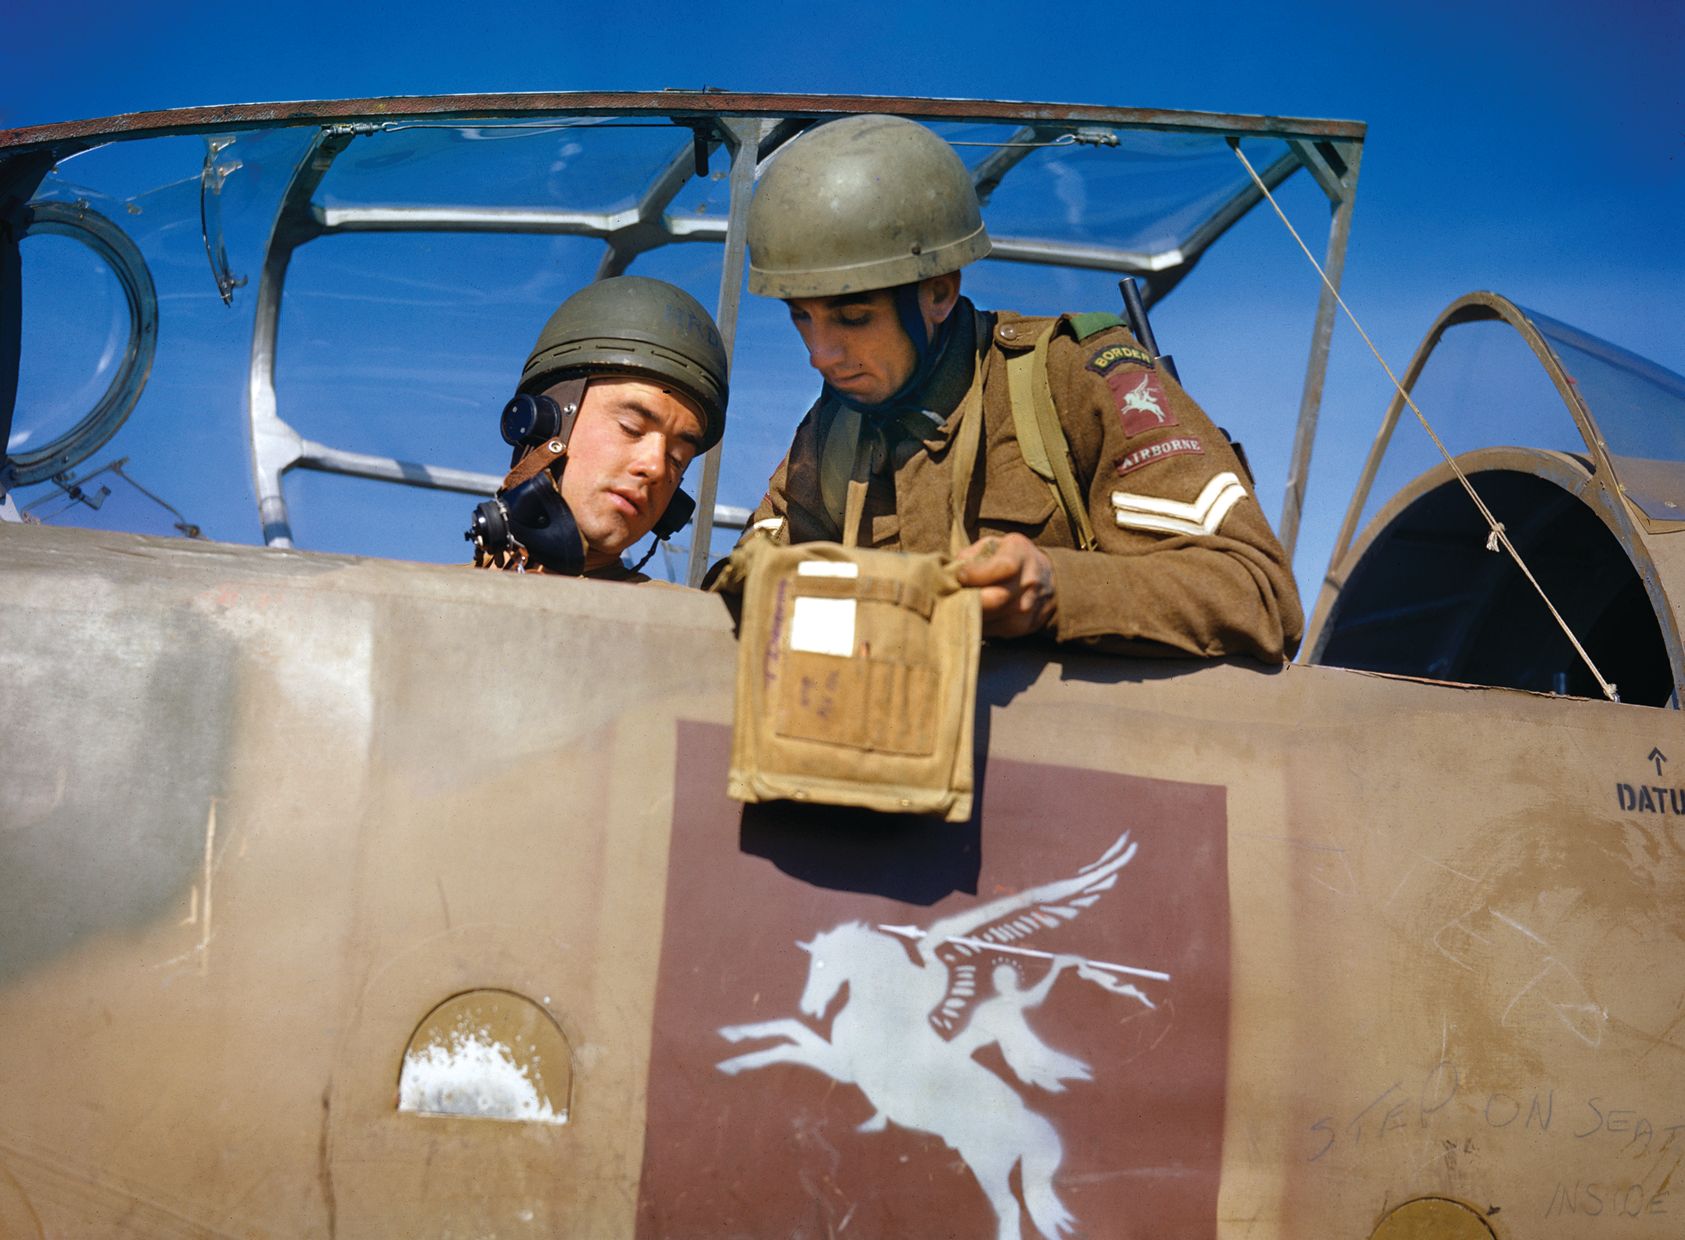 The Pegasus insignia of the 6th Airborne Division prominently emblazoned on the fuselage of their Hotspur glider, a pair of glidermen prepare for a mission. Elements of the 6th Airborne gained fame in the predawn hours of D-Day, capturing the Caen Canal Bridge, which was later renamed Pegasus Bridge in honor of the exploit.